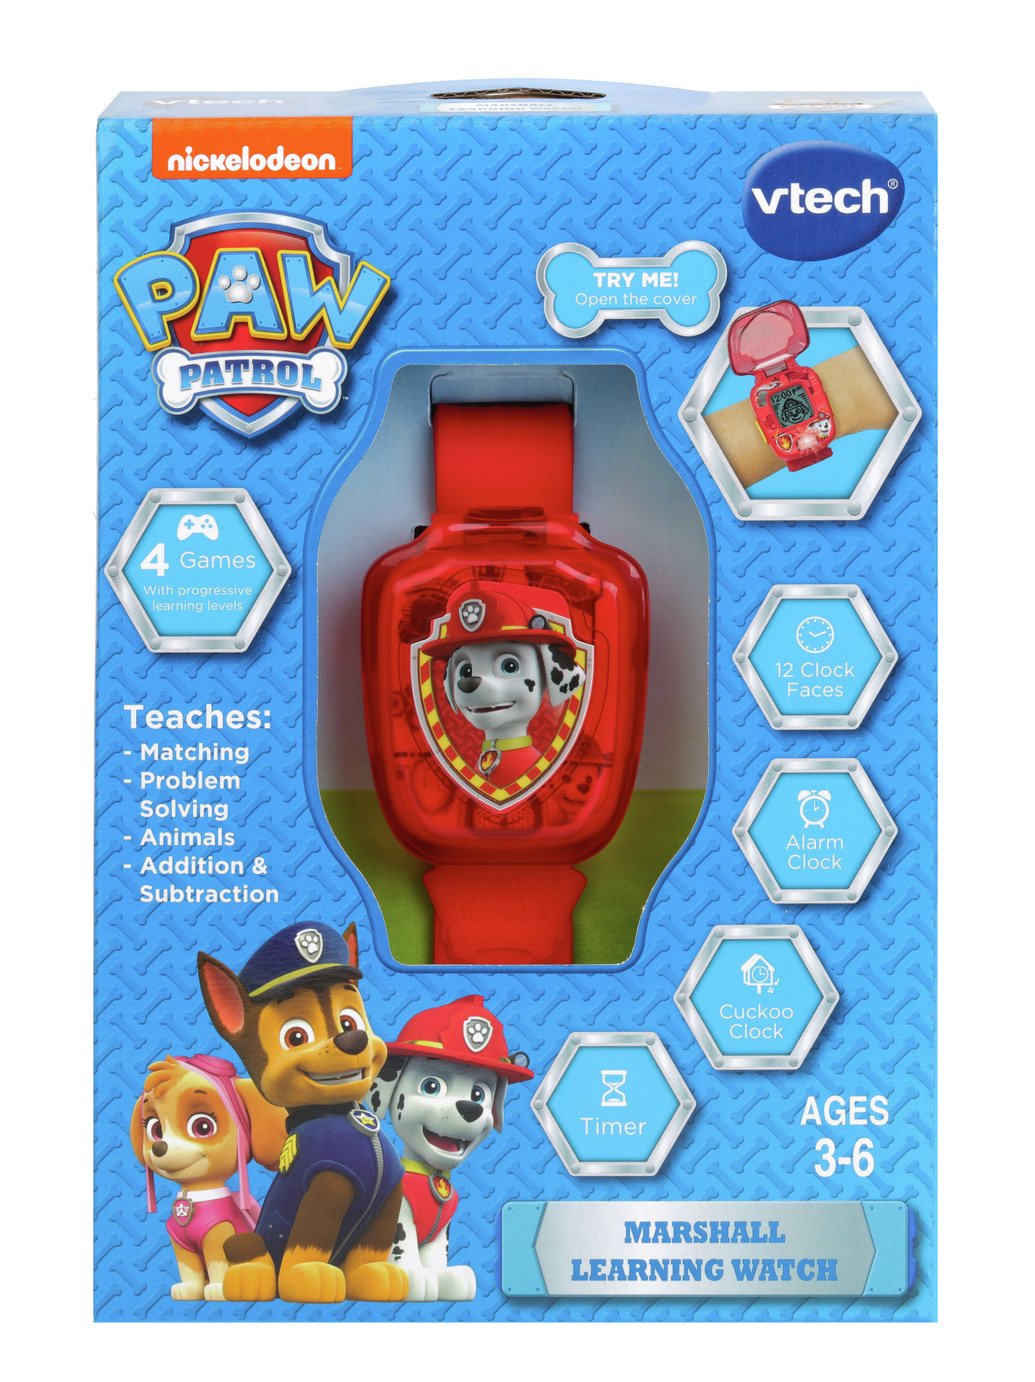 VTech PAW Patrol Marshall Learning Watch Review